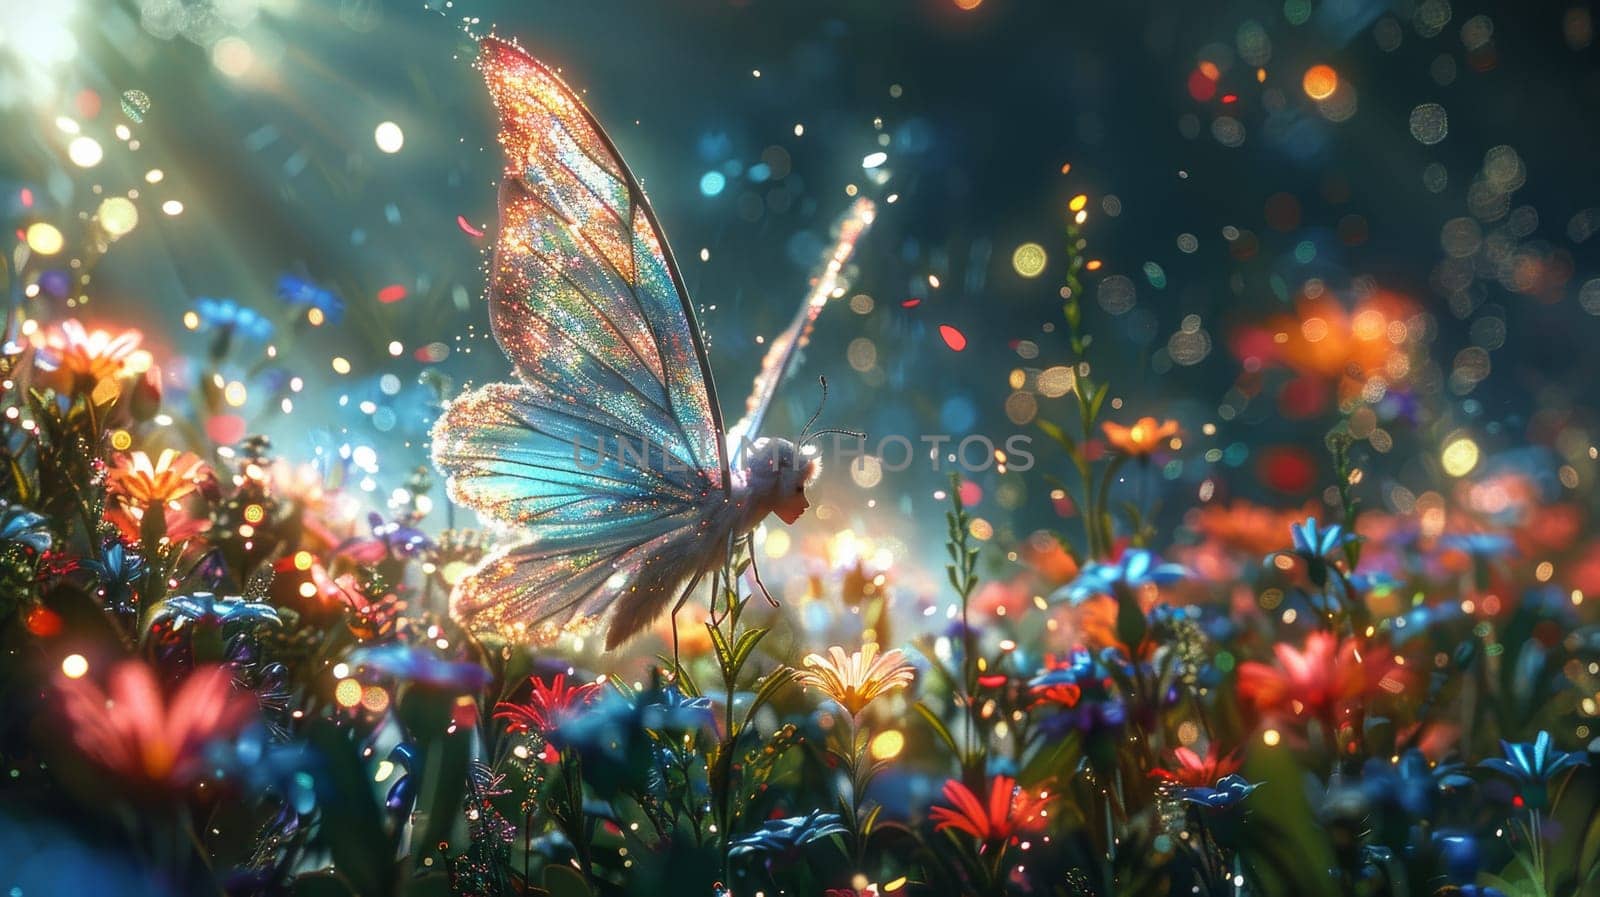 A fairy is walking through a field of flowers, with a butterfly following her. The scene is filled with bright colors and a sense of magic and wonder